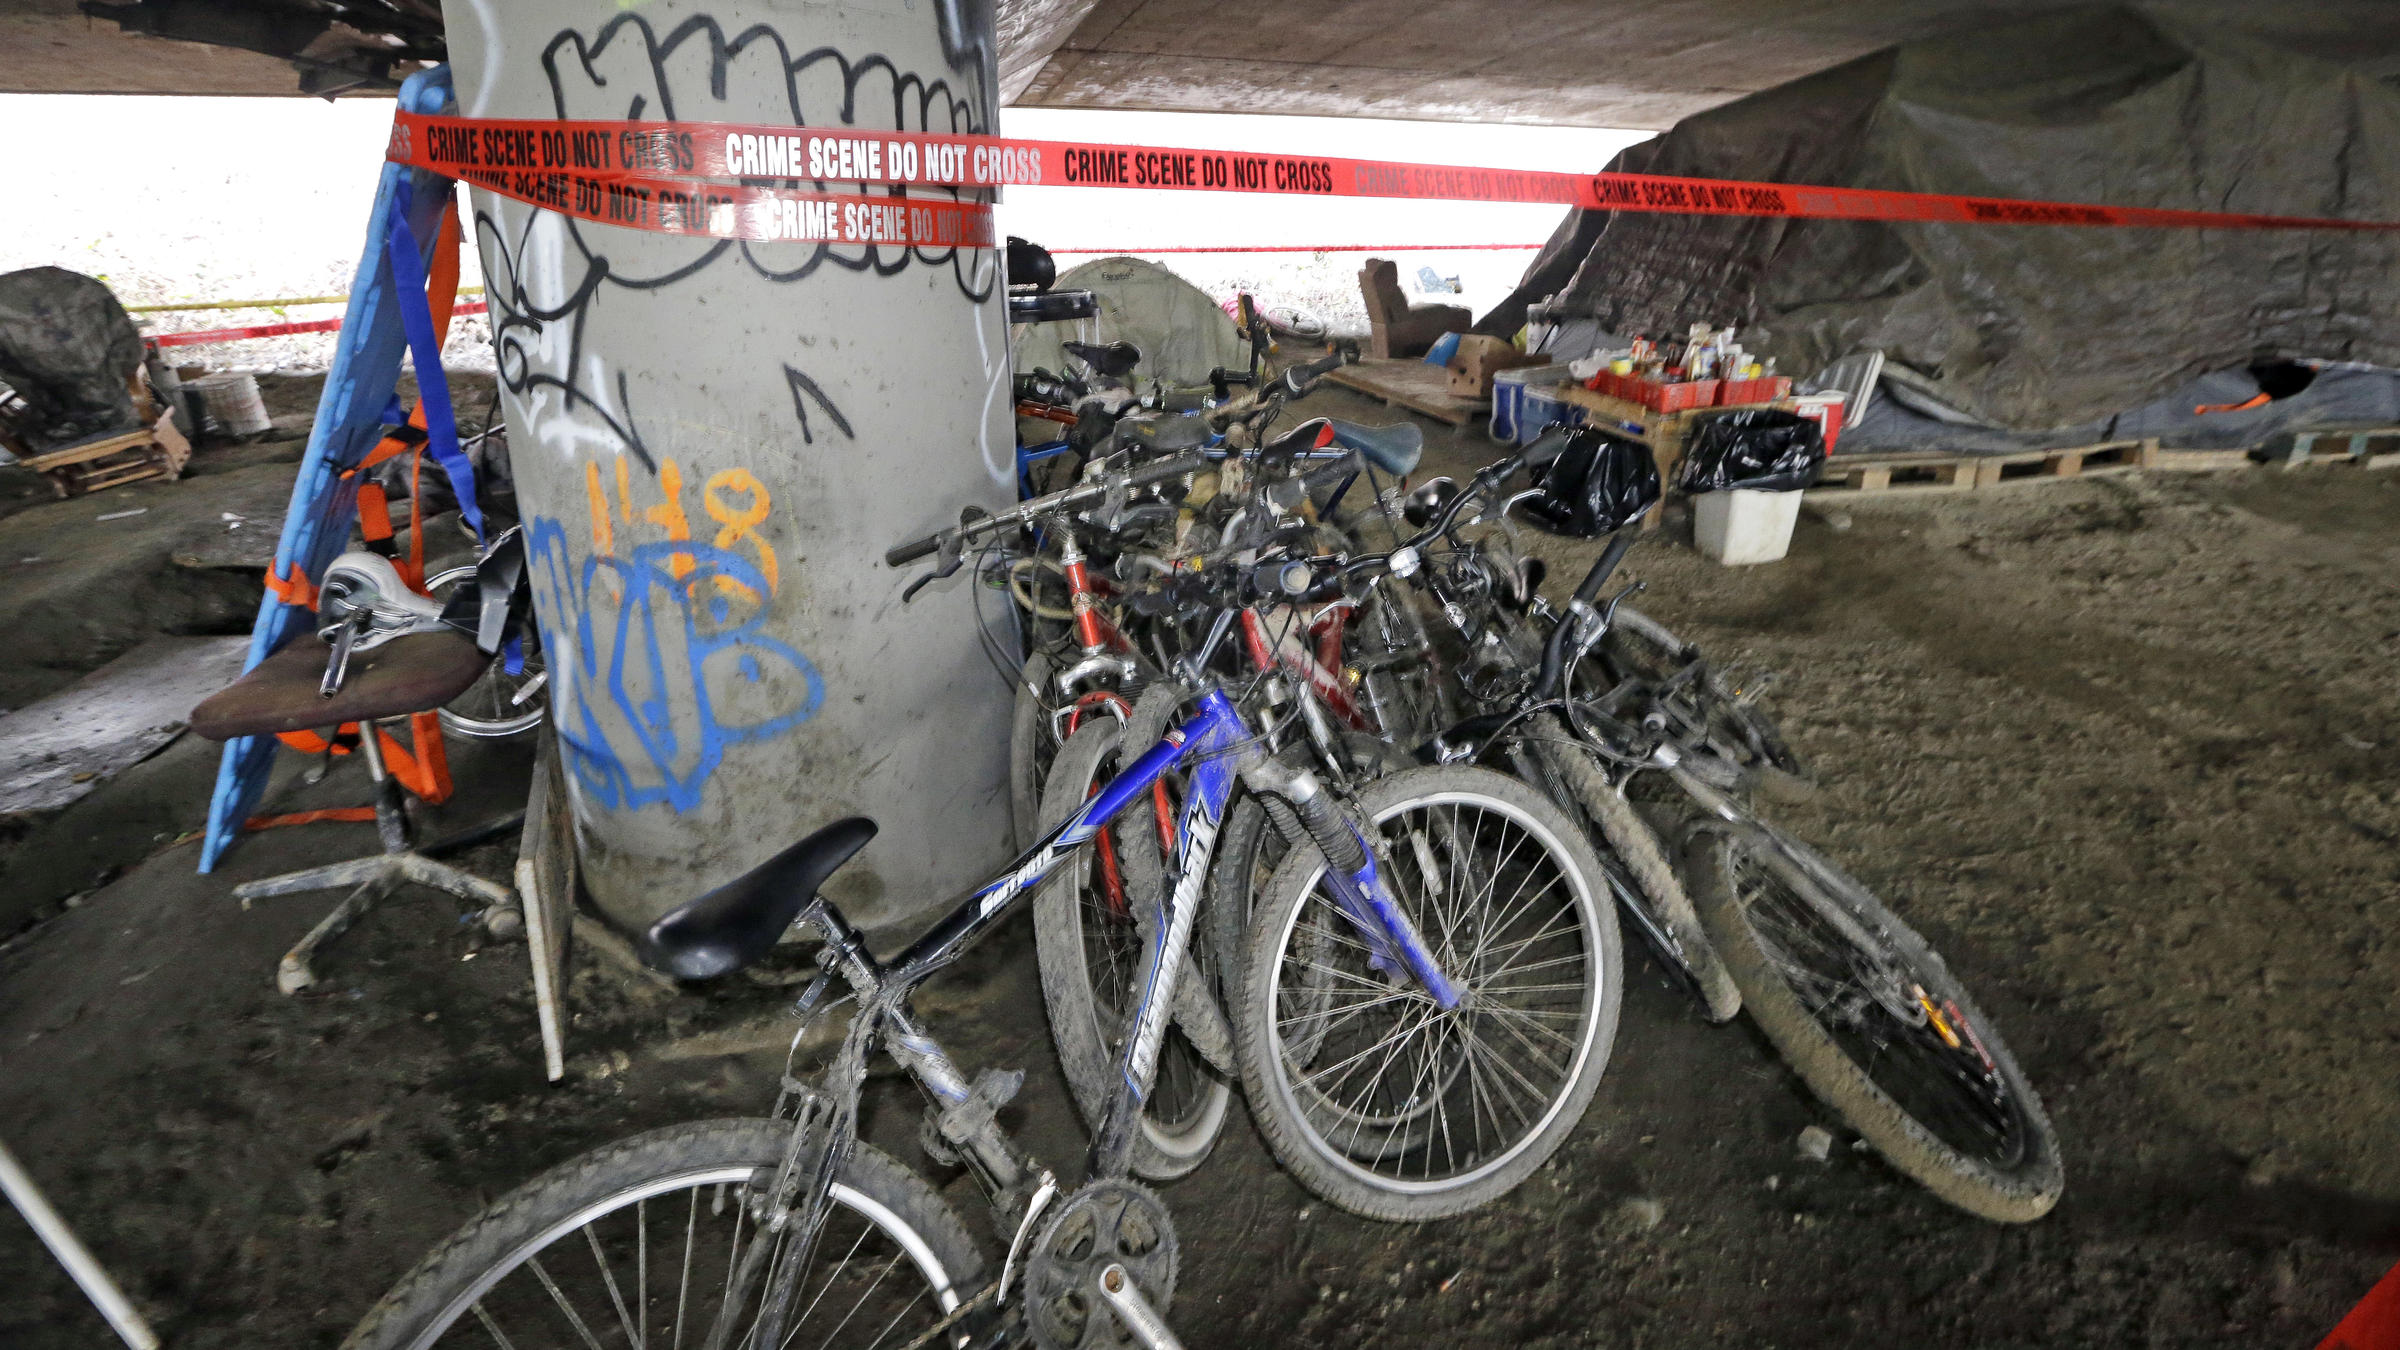 3 teens arrested in deadly shooting at Seattle homeless camp